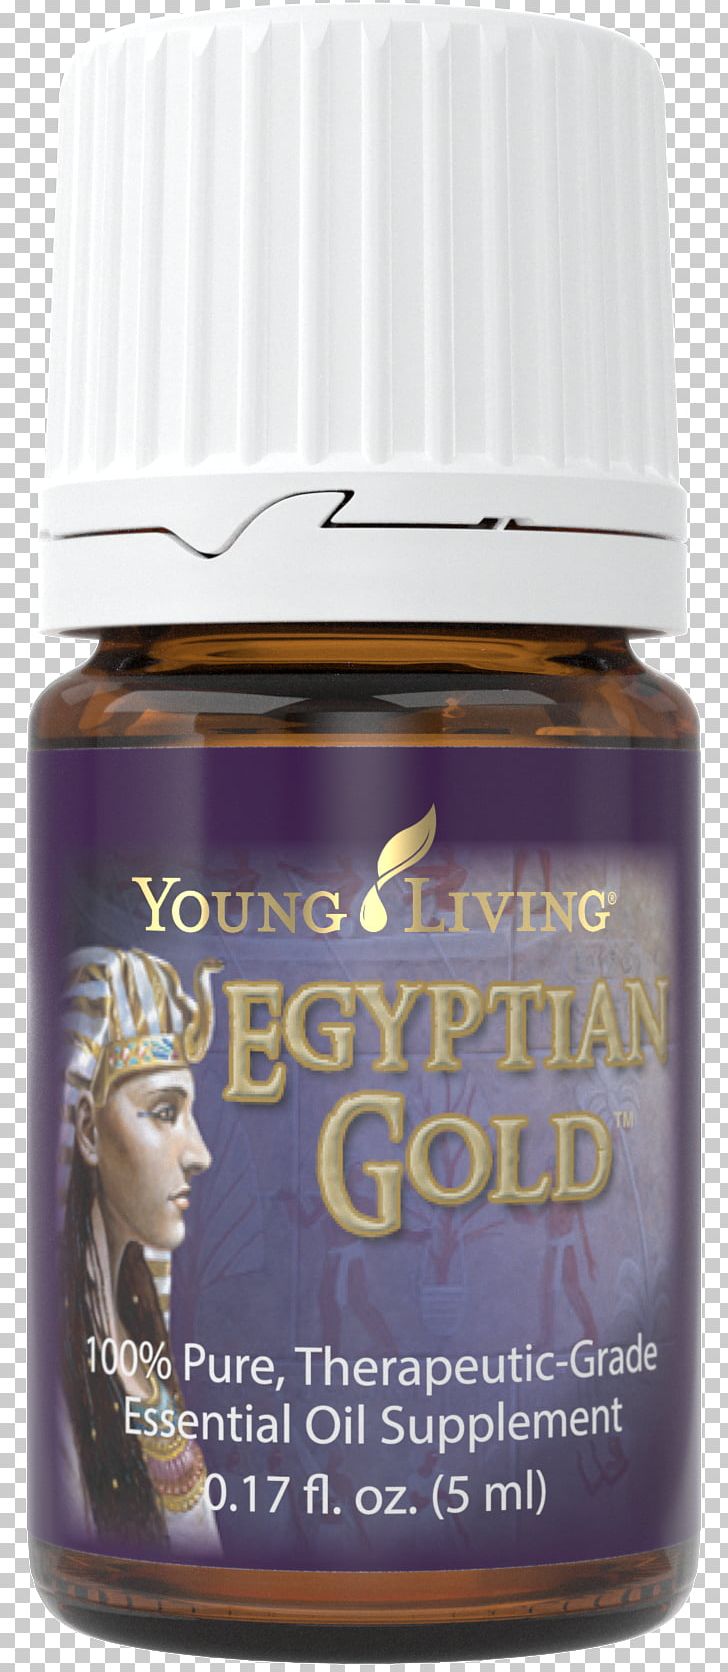 Egyptian Gold Essential Oil 5 Ml Young Living Product Purple PNG, Clipart, Egyptian Gold Essential Oil 5 Ml, Essential Oil, Liquid, Liquidm, Purple Free PNG Download